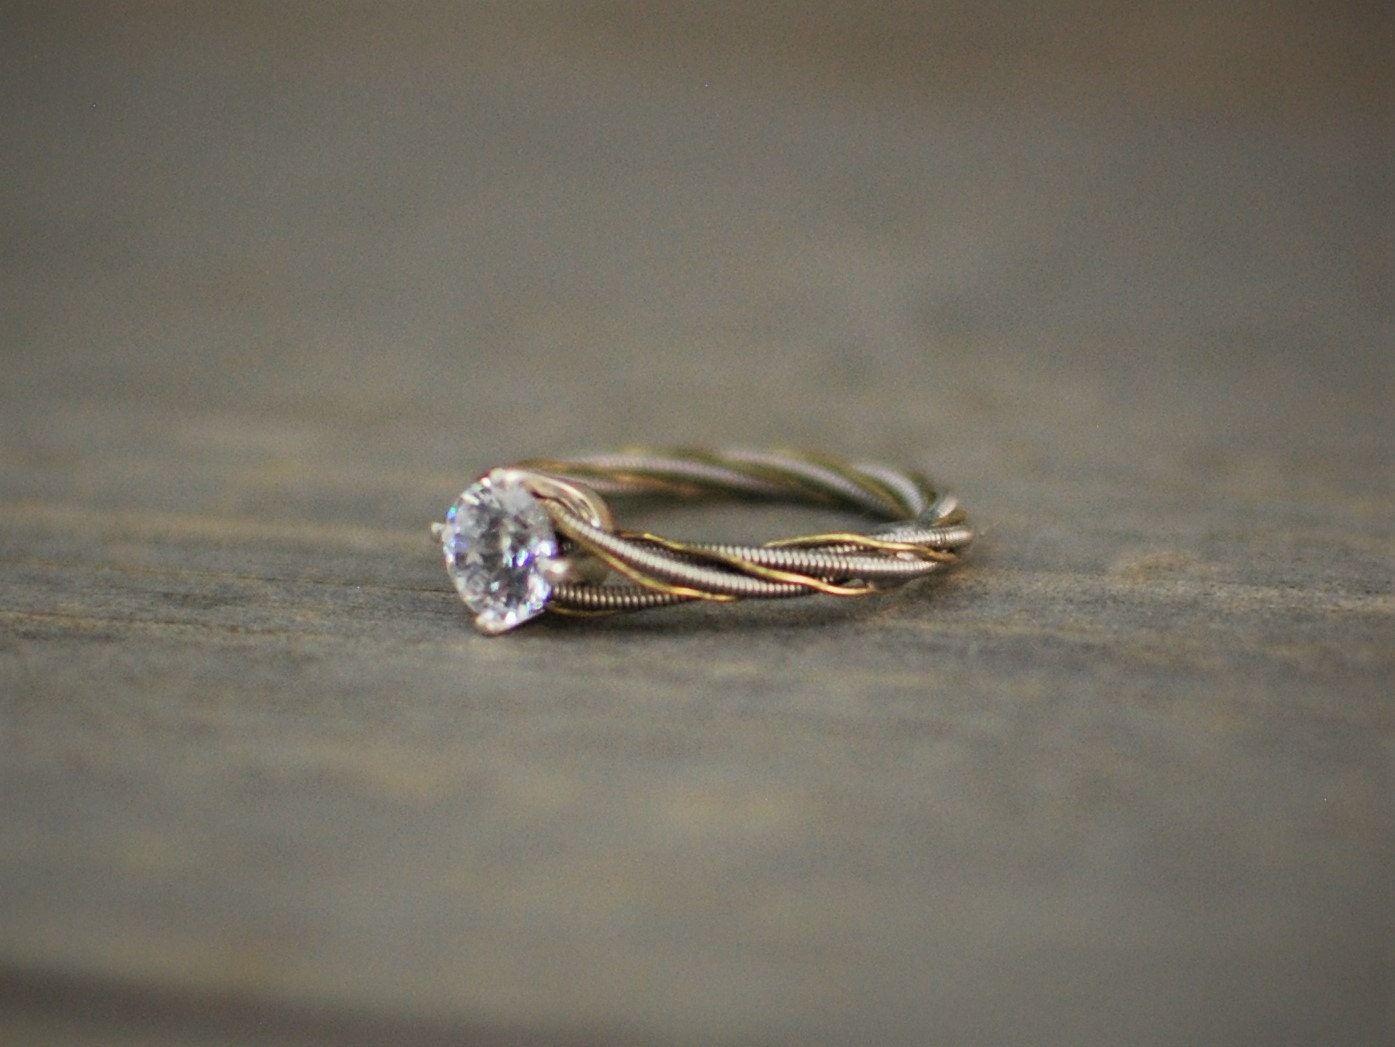 Guitar String Engagement Ring, Purity Ring, Unique Engagement Ring, Birthstone, Guitar String Jewelry, Guitar Gifts, Silver and Gold Ring